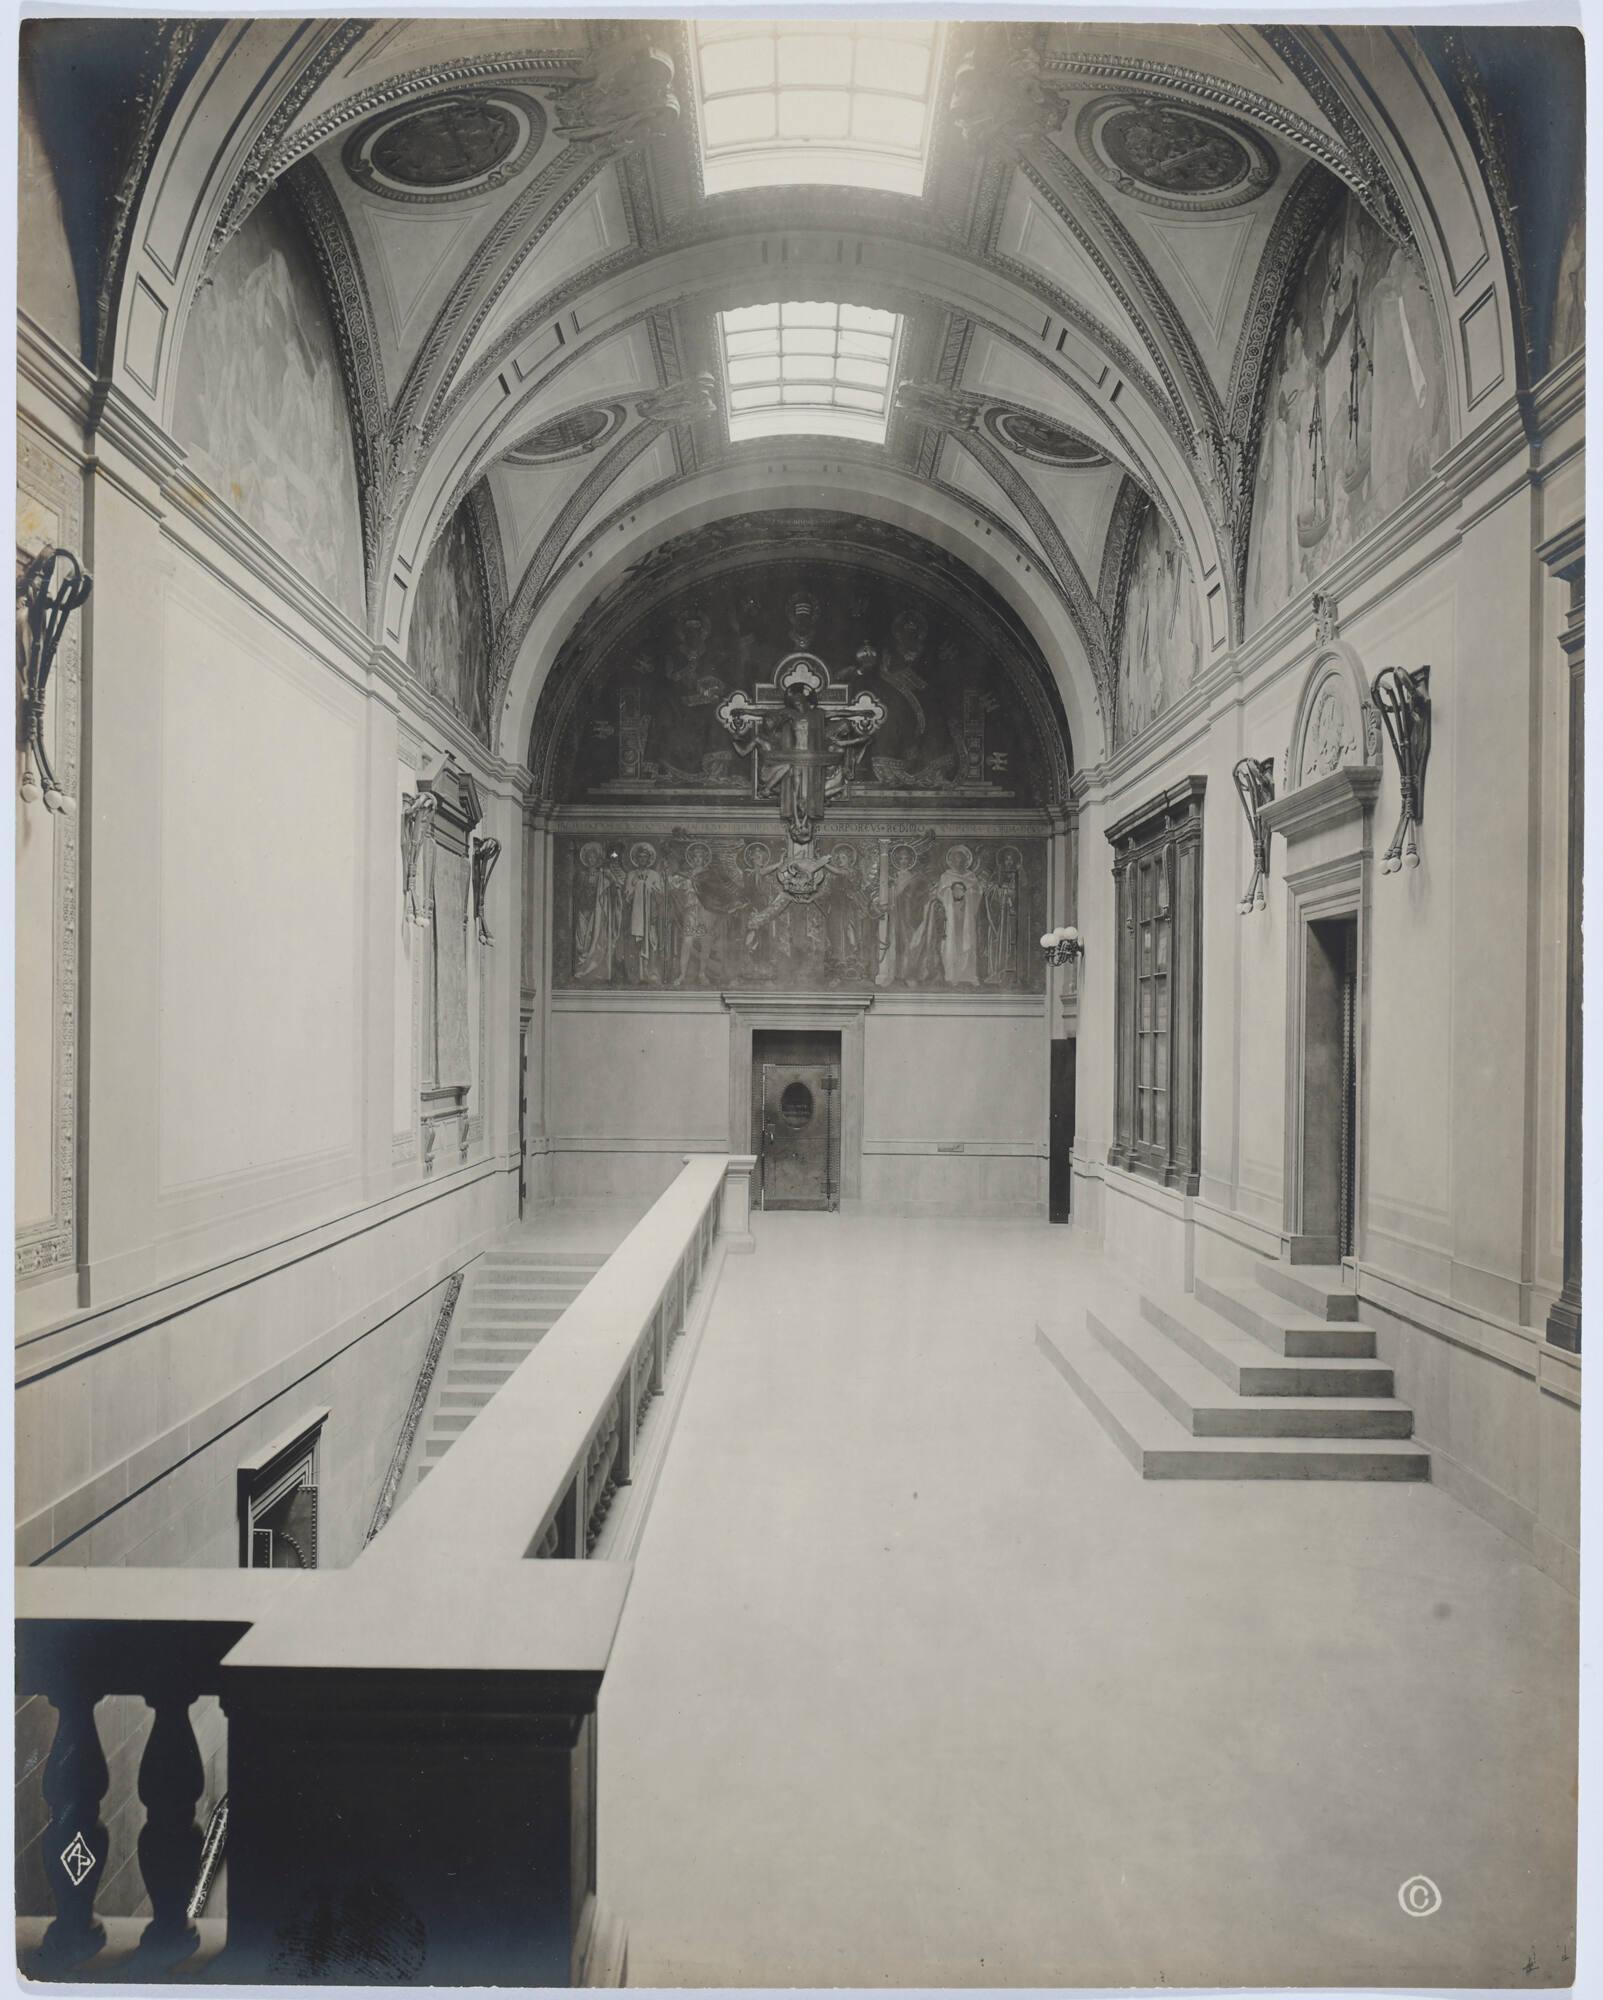 Black and white photographic print showing a room view of the Boston Public Library.